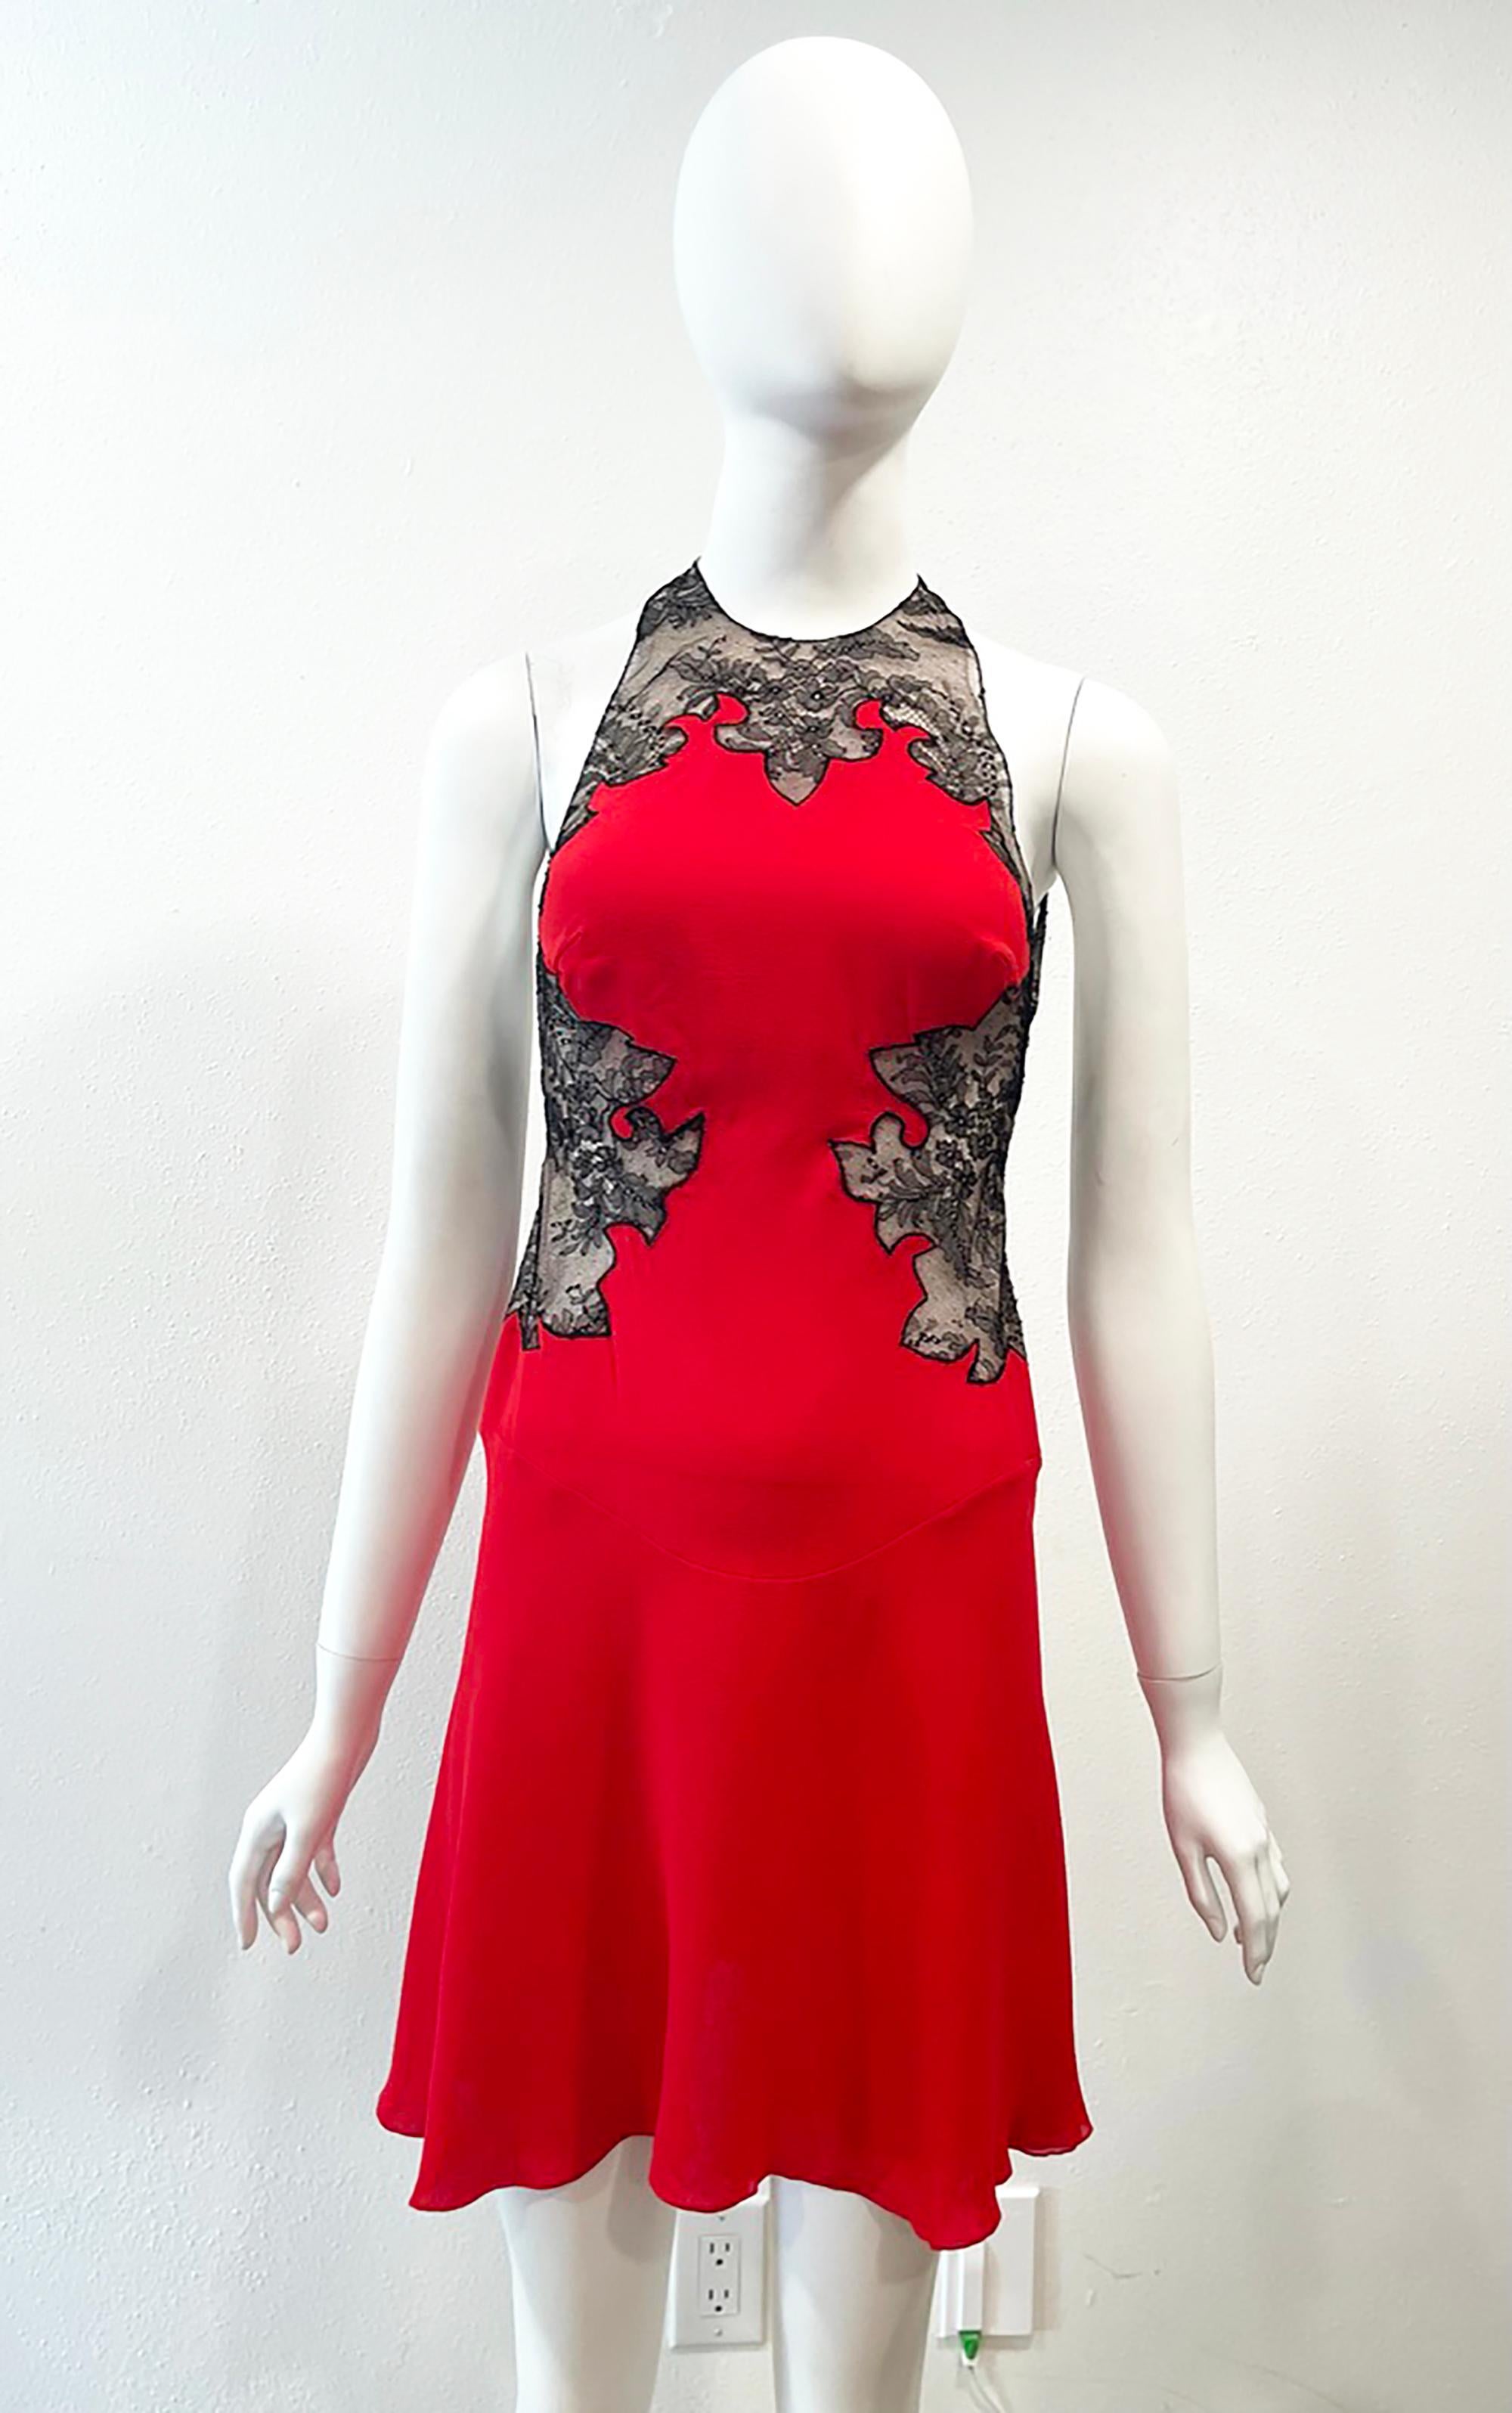 S/S 2002 Gianni Versace Red Mini Dress Sheer With Black Lace Trim In Excellent Condition For Sale In Austin, TX